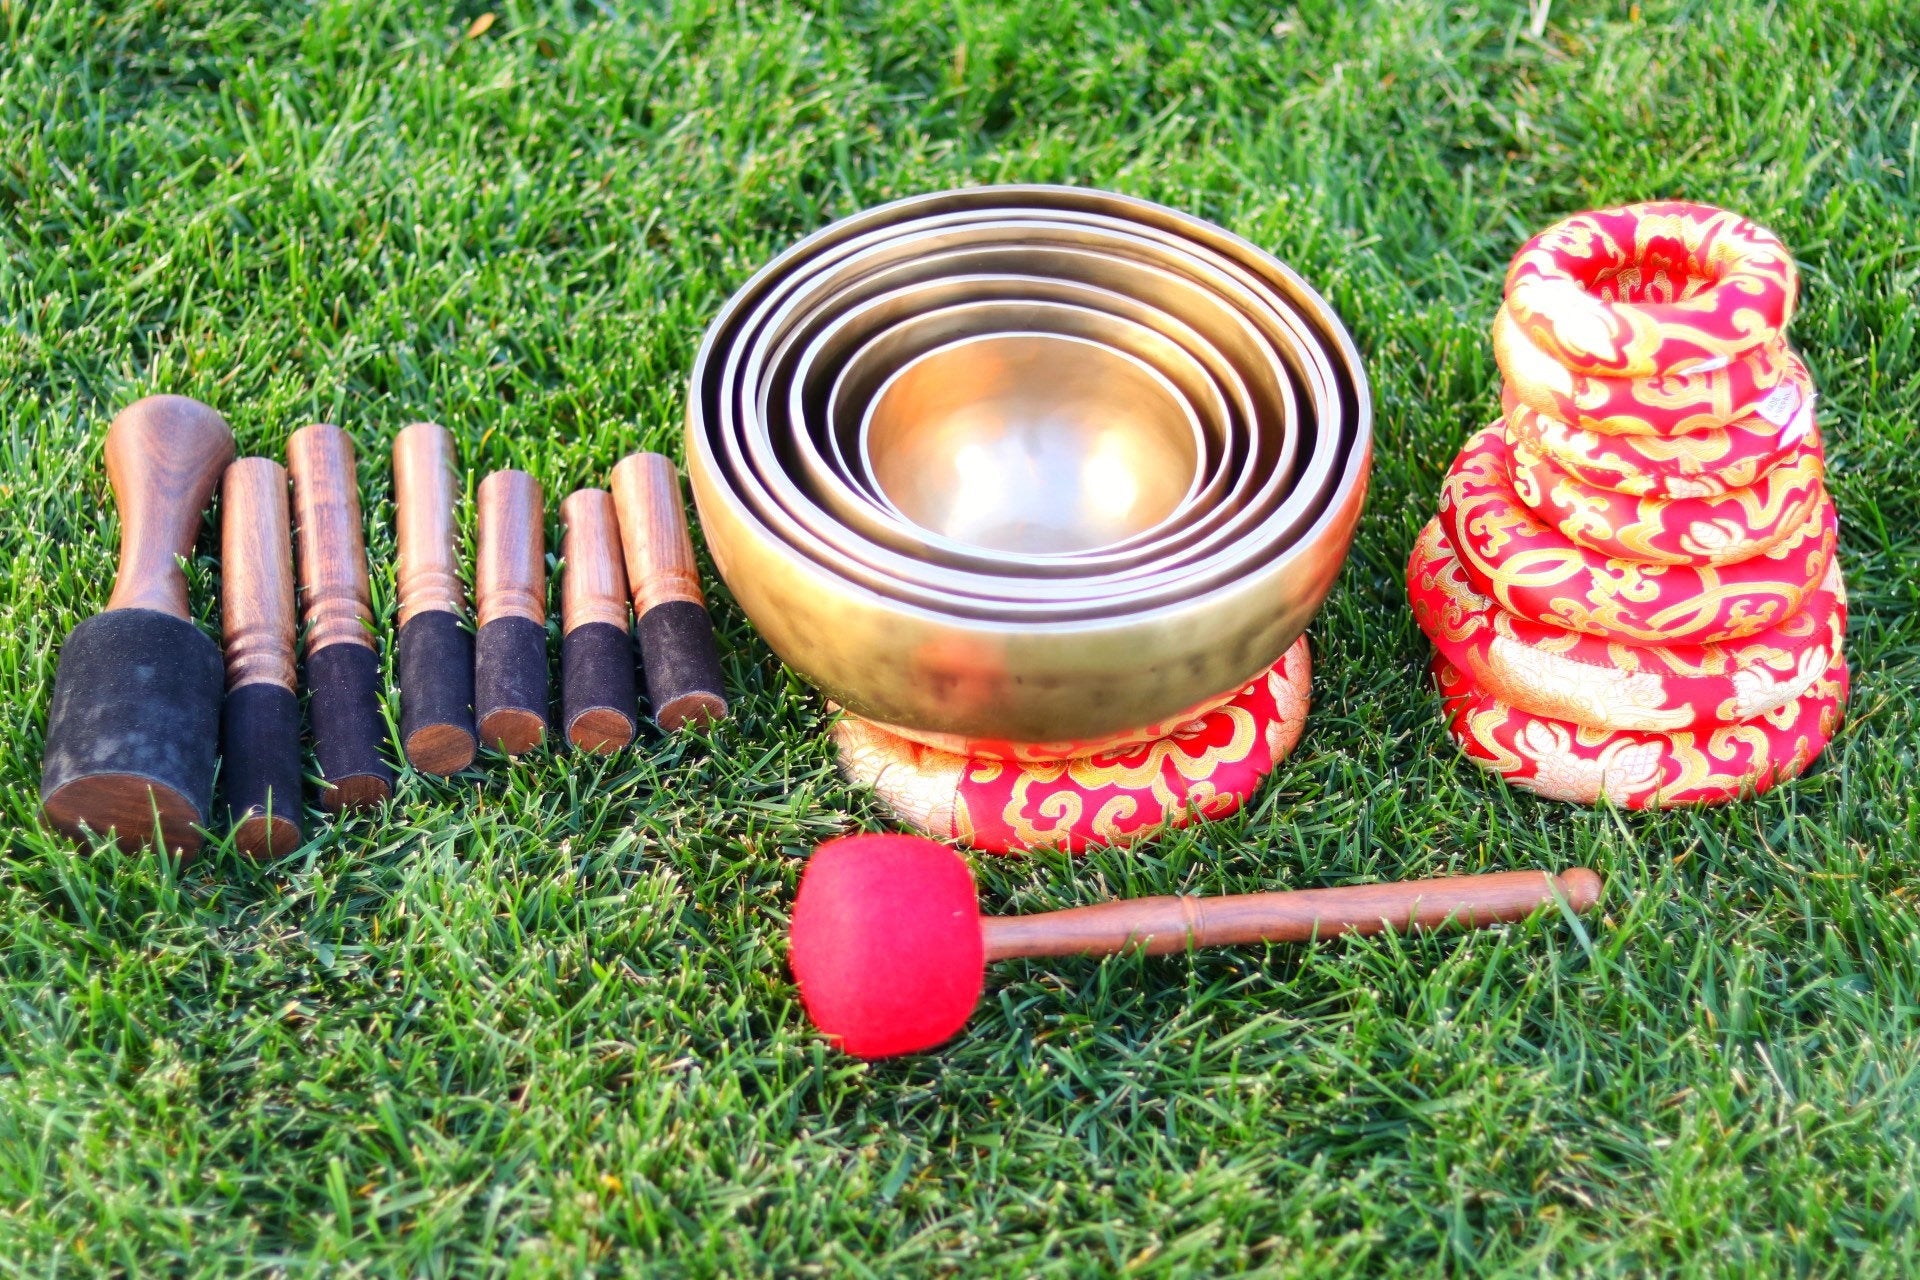 SALE!!!! !!High quality | 7 chakra singing bowl used for meditation, healing, mindfulness, sound therapy and yoga.